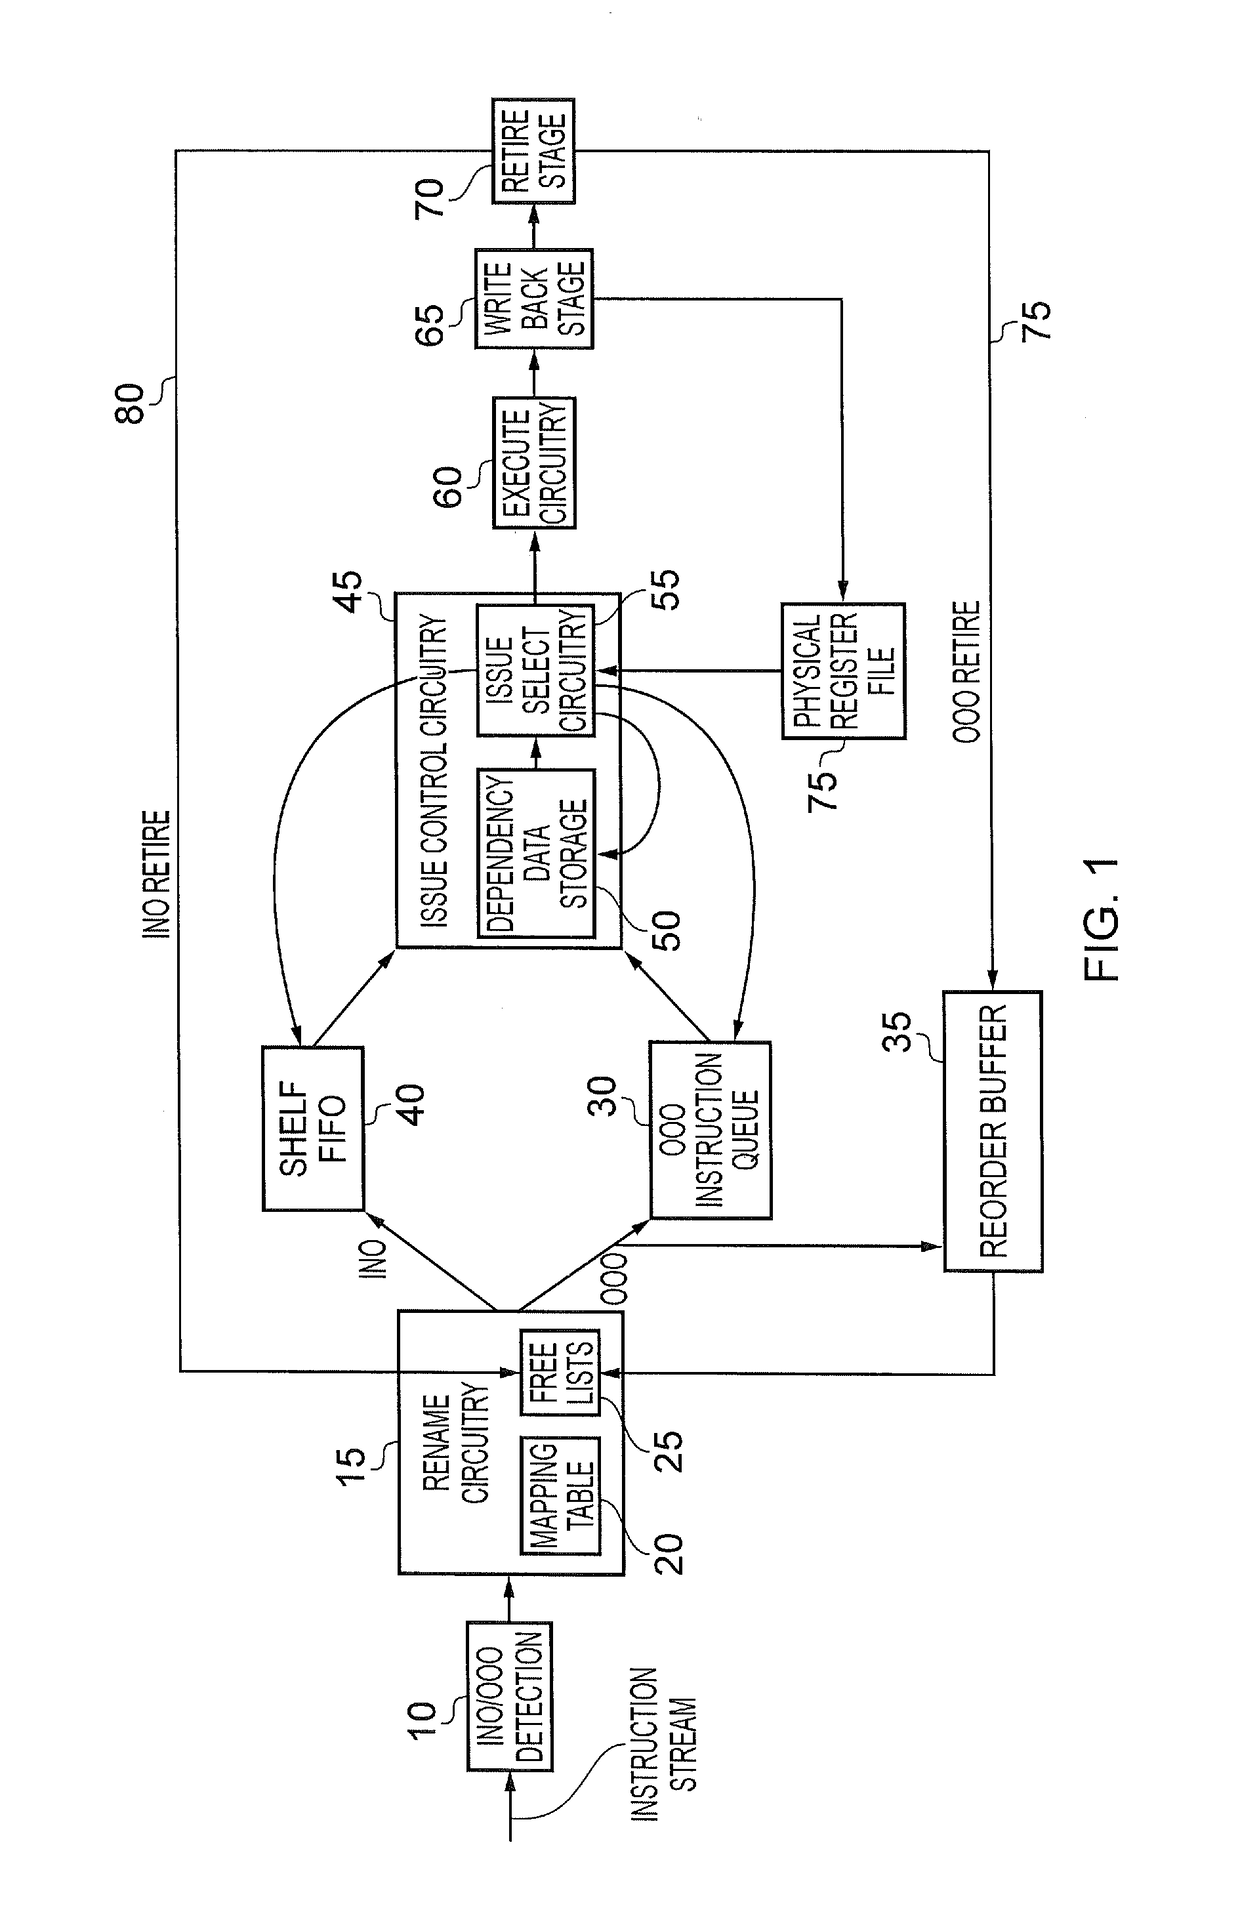 A data processing apparatus and method for executing a stream of instructions out of order with respect to original program order